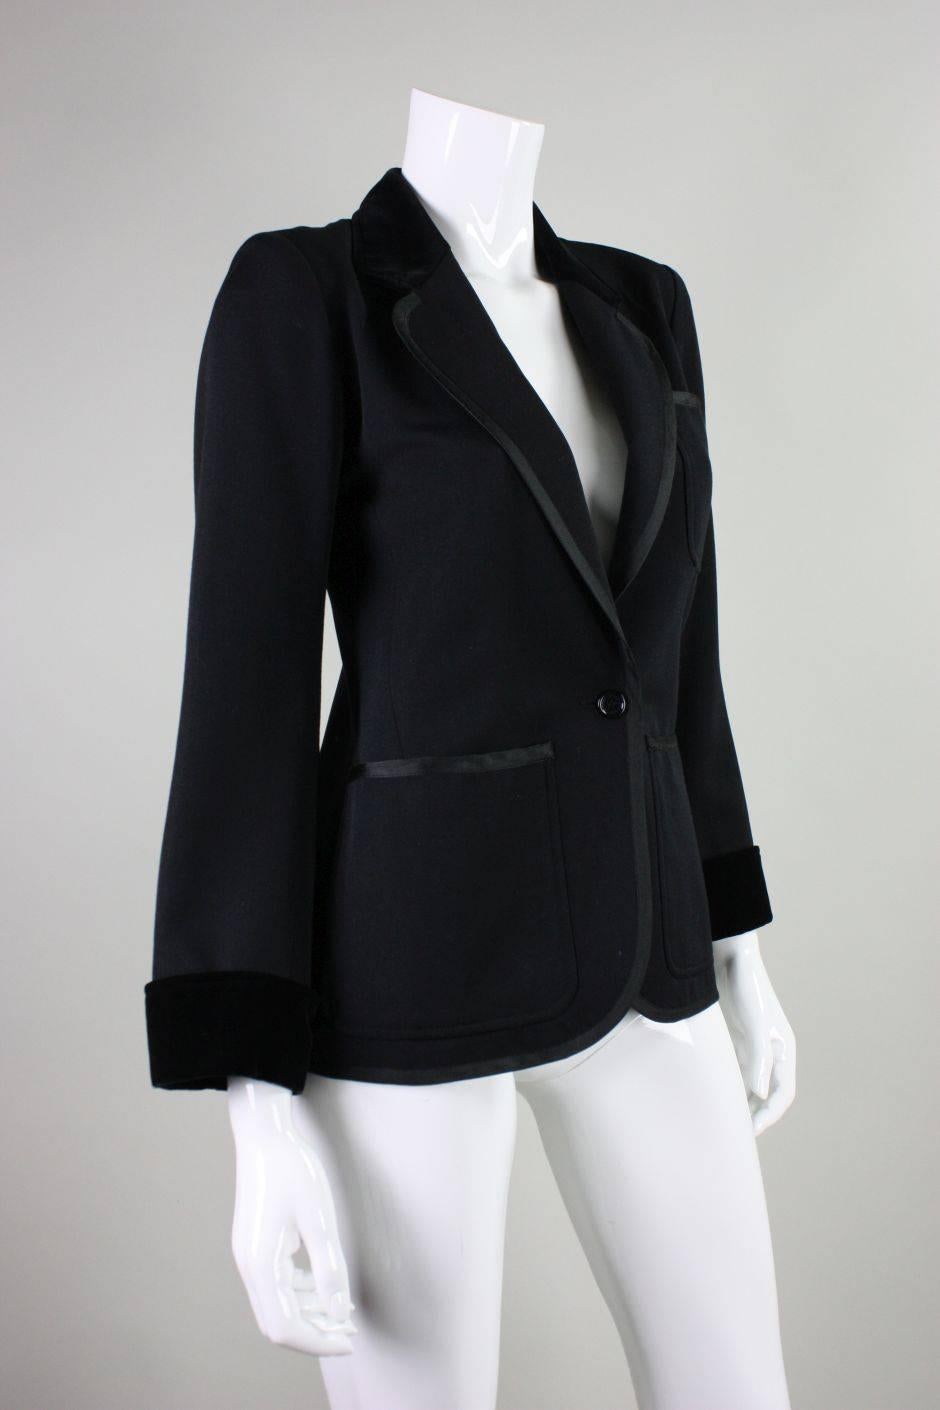 Vintage jacket from YSL dates to 1970's and is made of black wool with black velvet detailing at the collar and cuffs.  Notched lapel.  Three patch front pockets. Single center front button closure at waist.  Fully lined.  
Labeled size